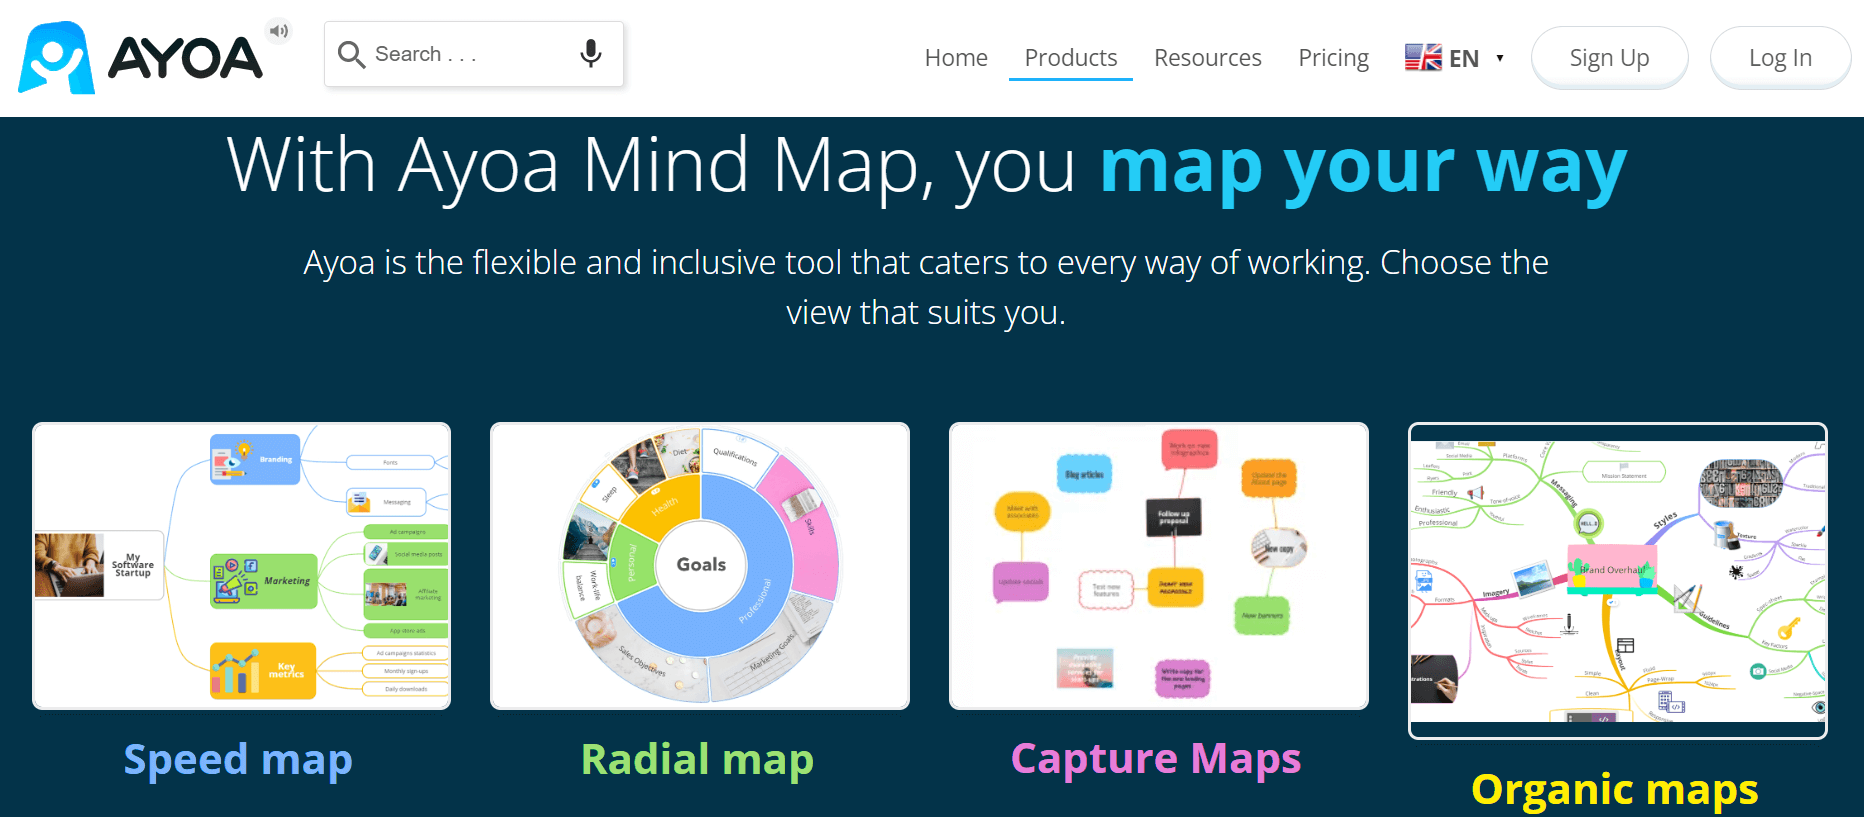 Ayoa offers speed maps, radial maps, capture maps and organic maps